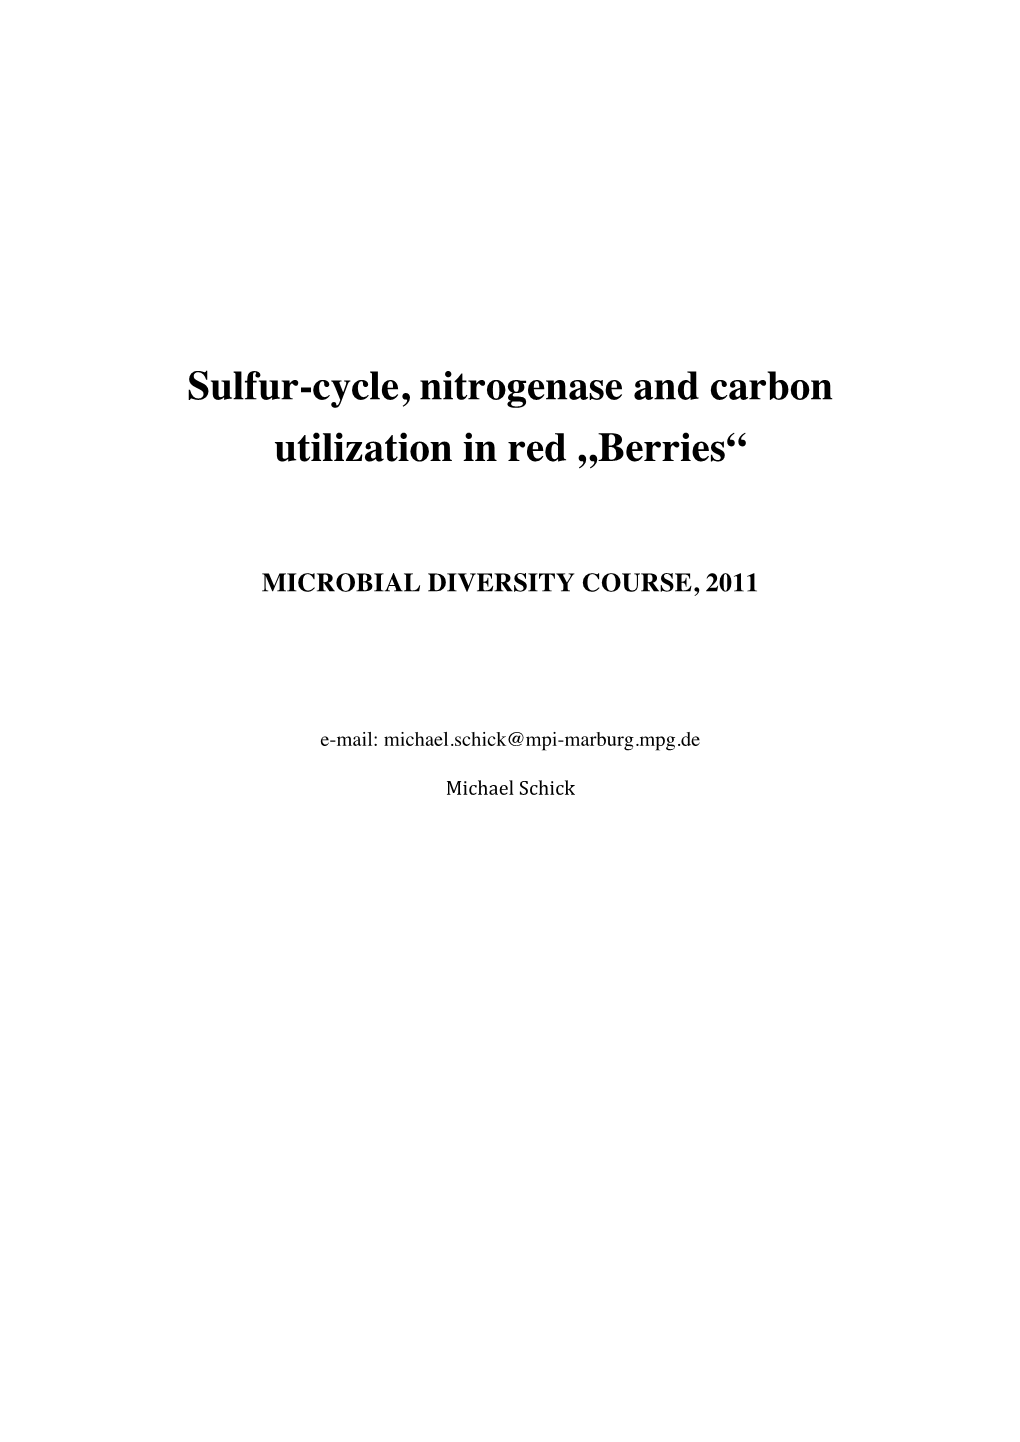 Schick, M. Sulfur-Cycle, Nitrogenase and Carbon Utilization In